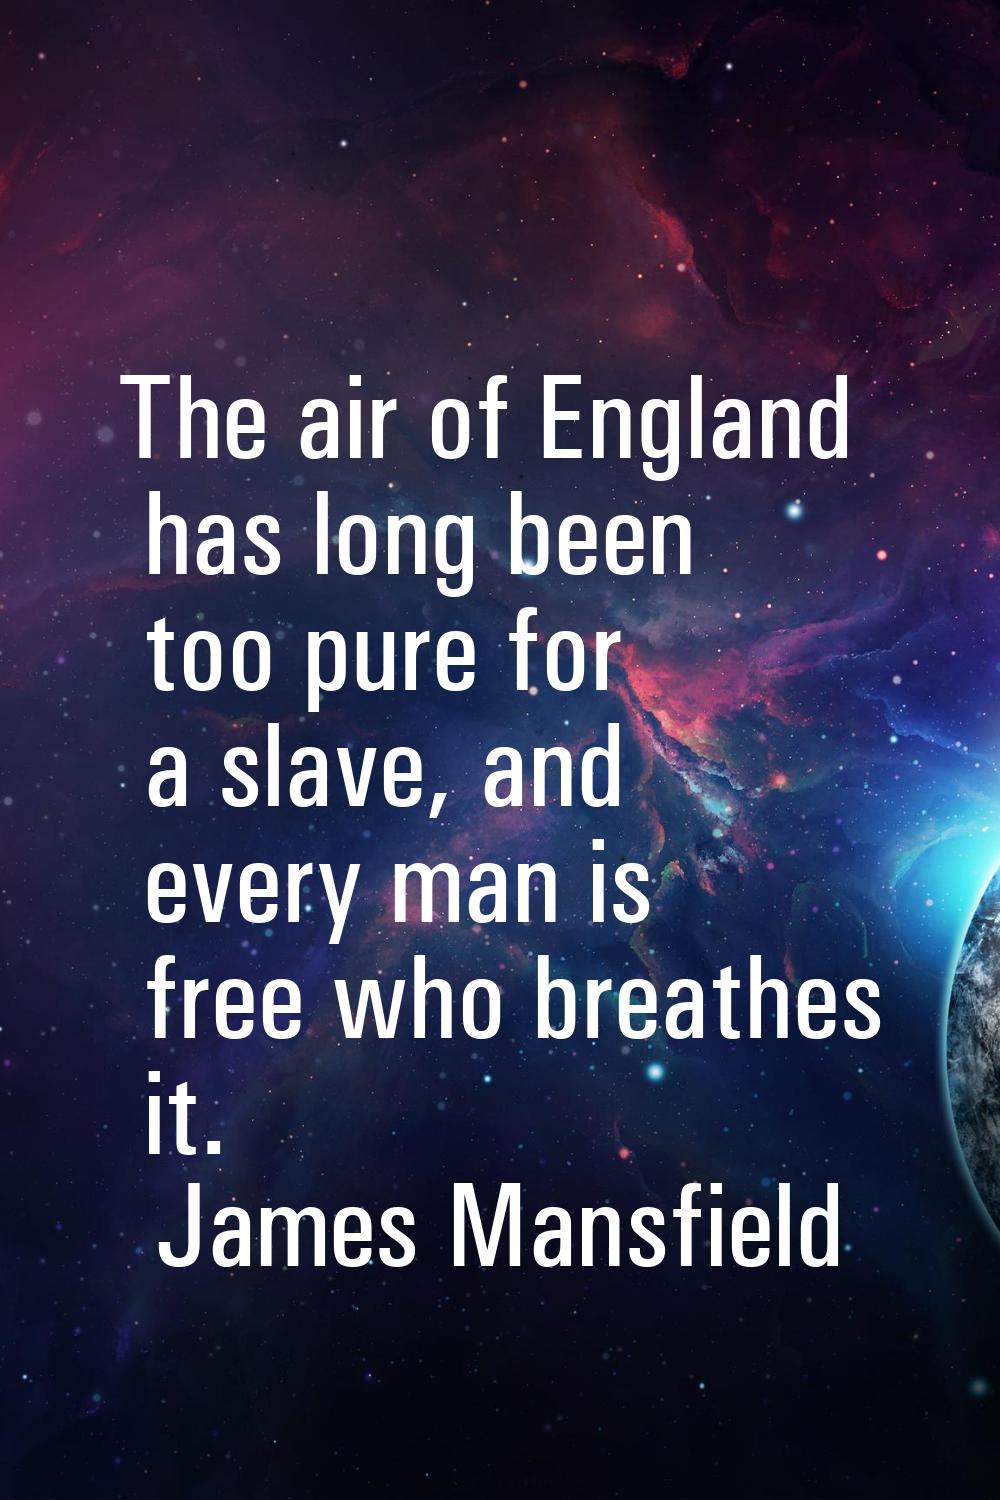 The air of England has long been too pure for a slave, and every man is free who breathes it.